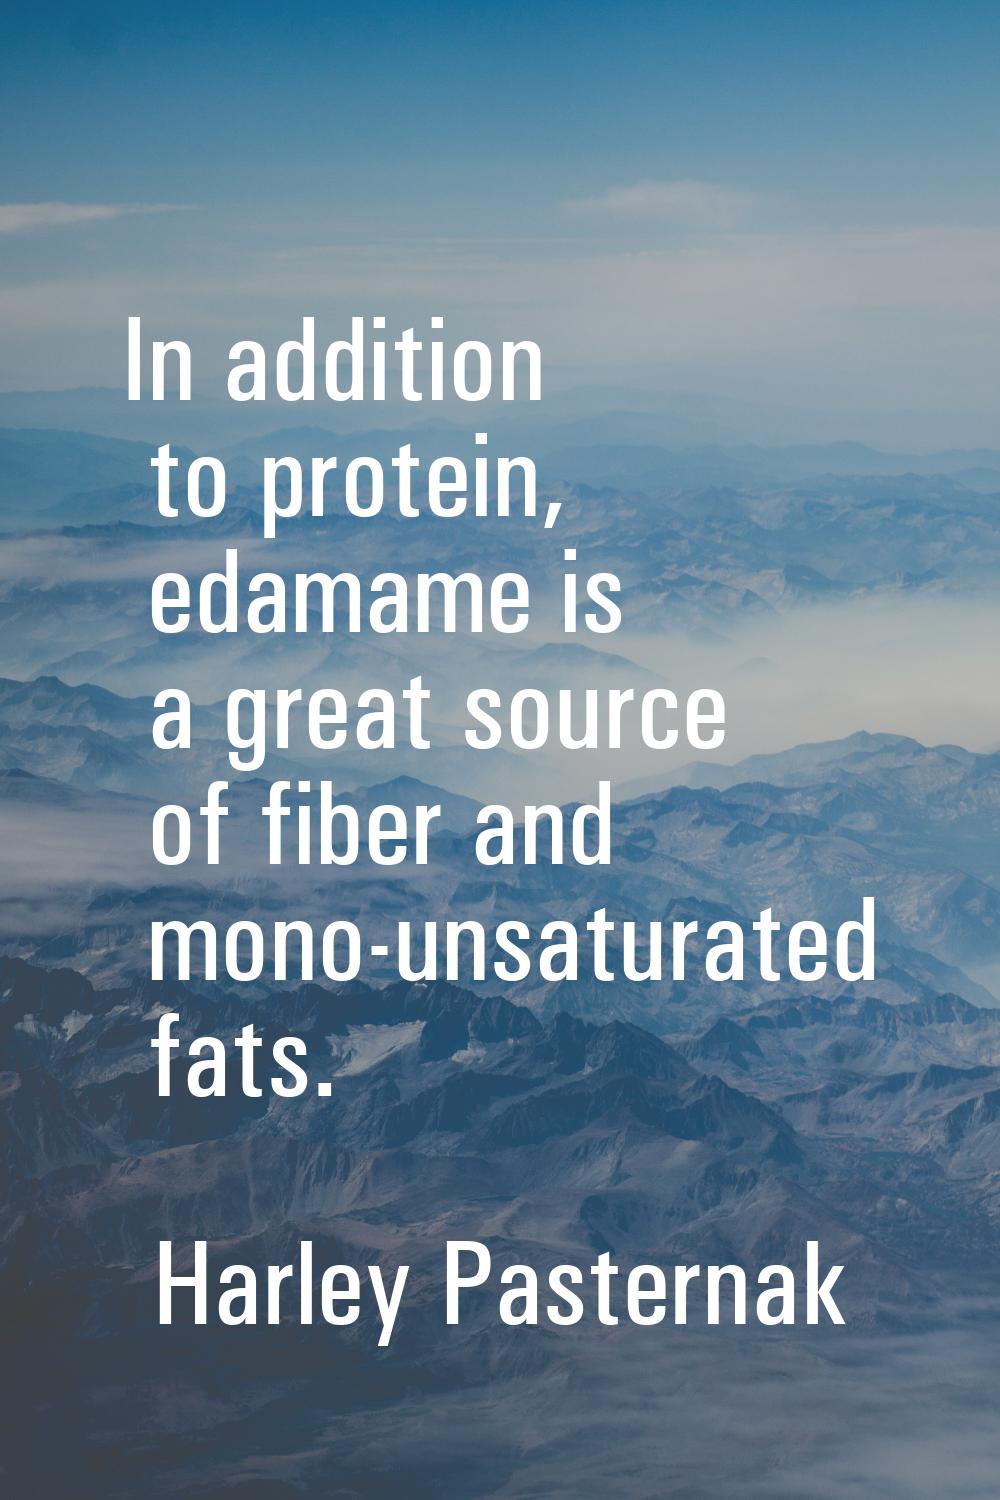 In addition to protein, edamame is a great source of fiber and mono-unsaturated fats.